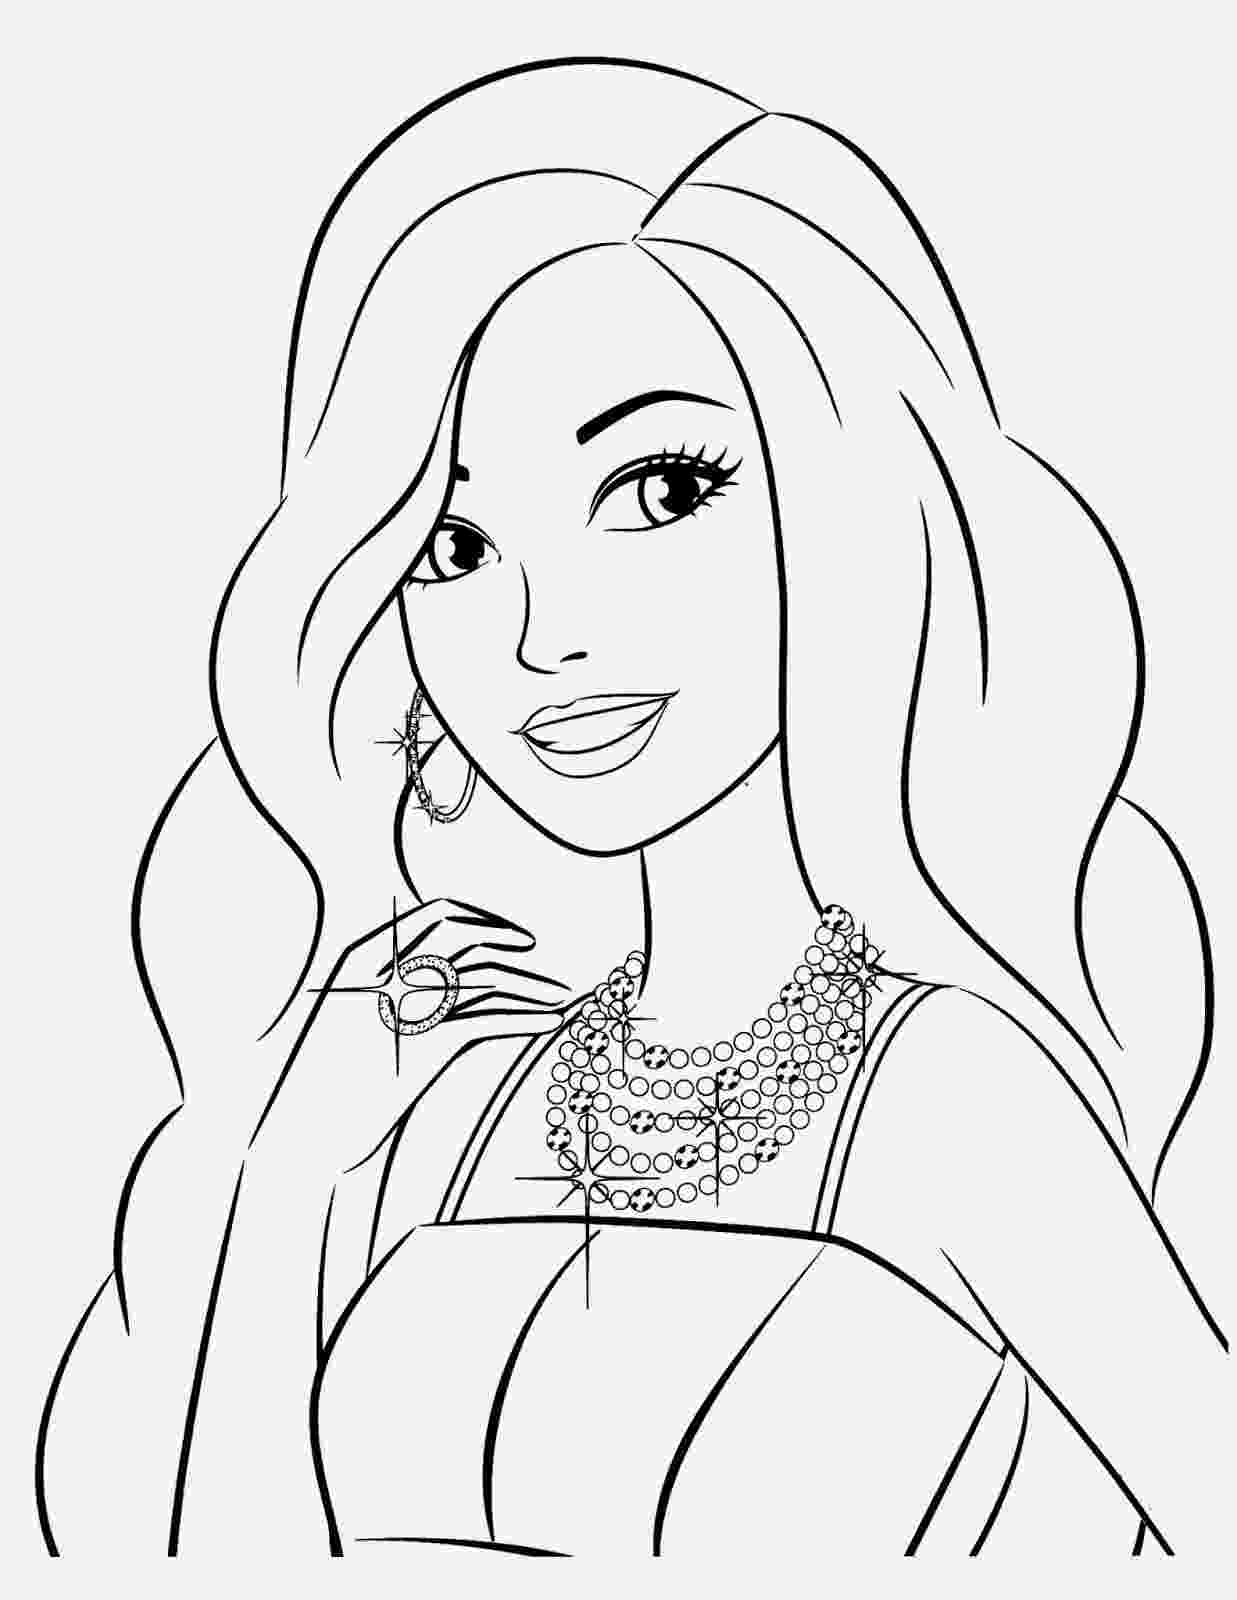 barbie coloring pages printable free coloring pages barbie free printable coloring pages free coloring barbie pages printable 